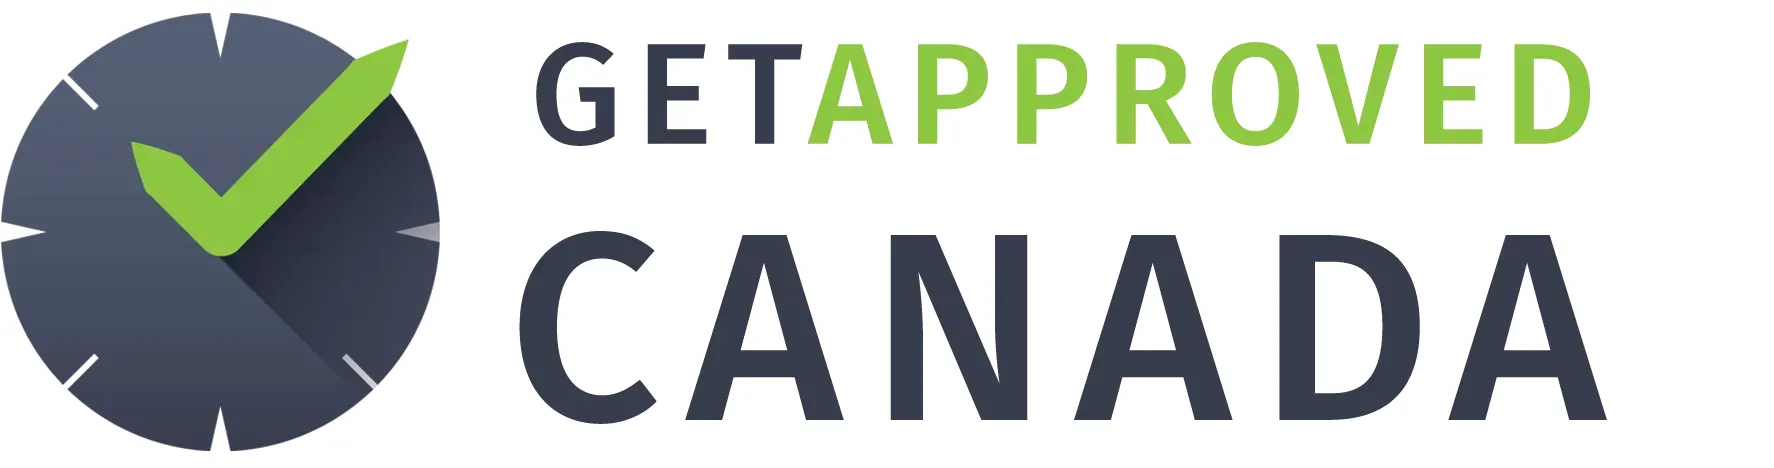 Get Approved Canada